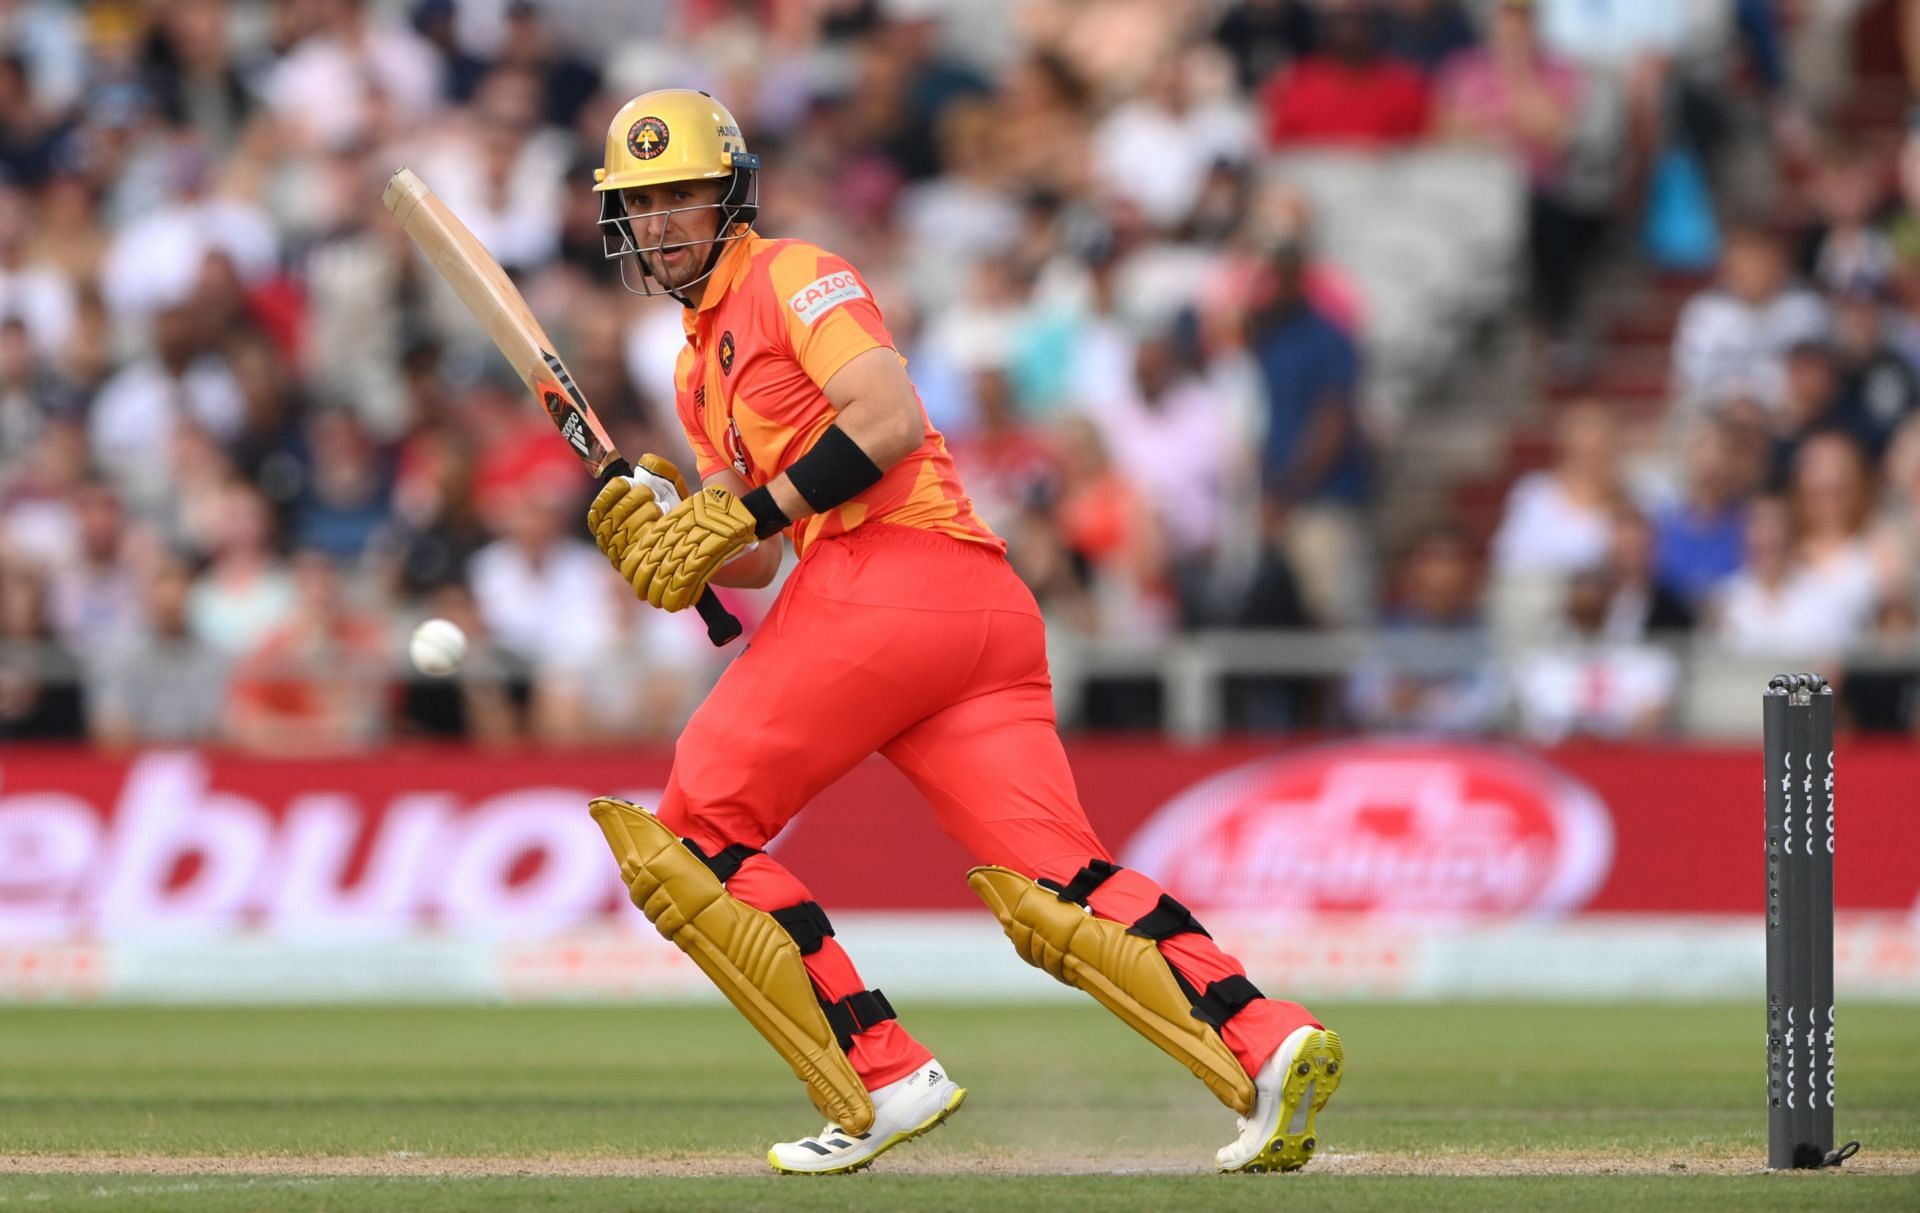 Liam Livingstone could be the latest England player to rake in the moolah come the IPL 2022 Auction.